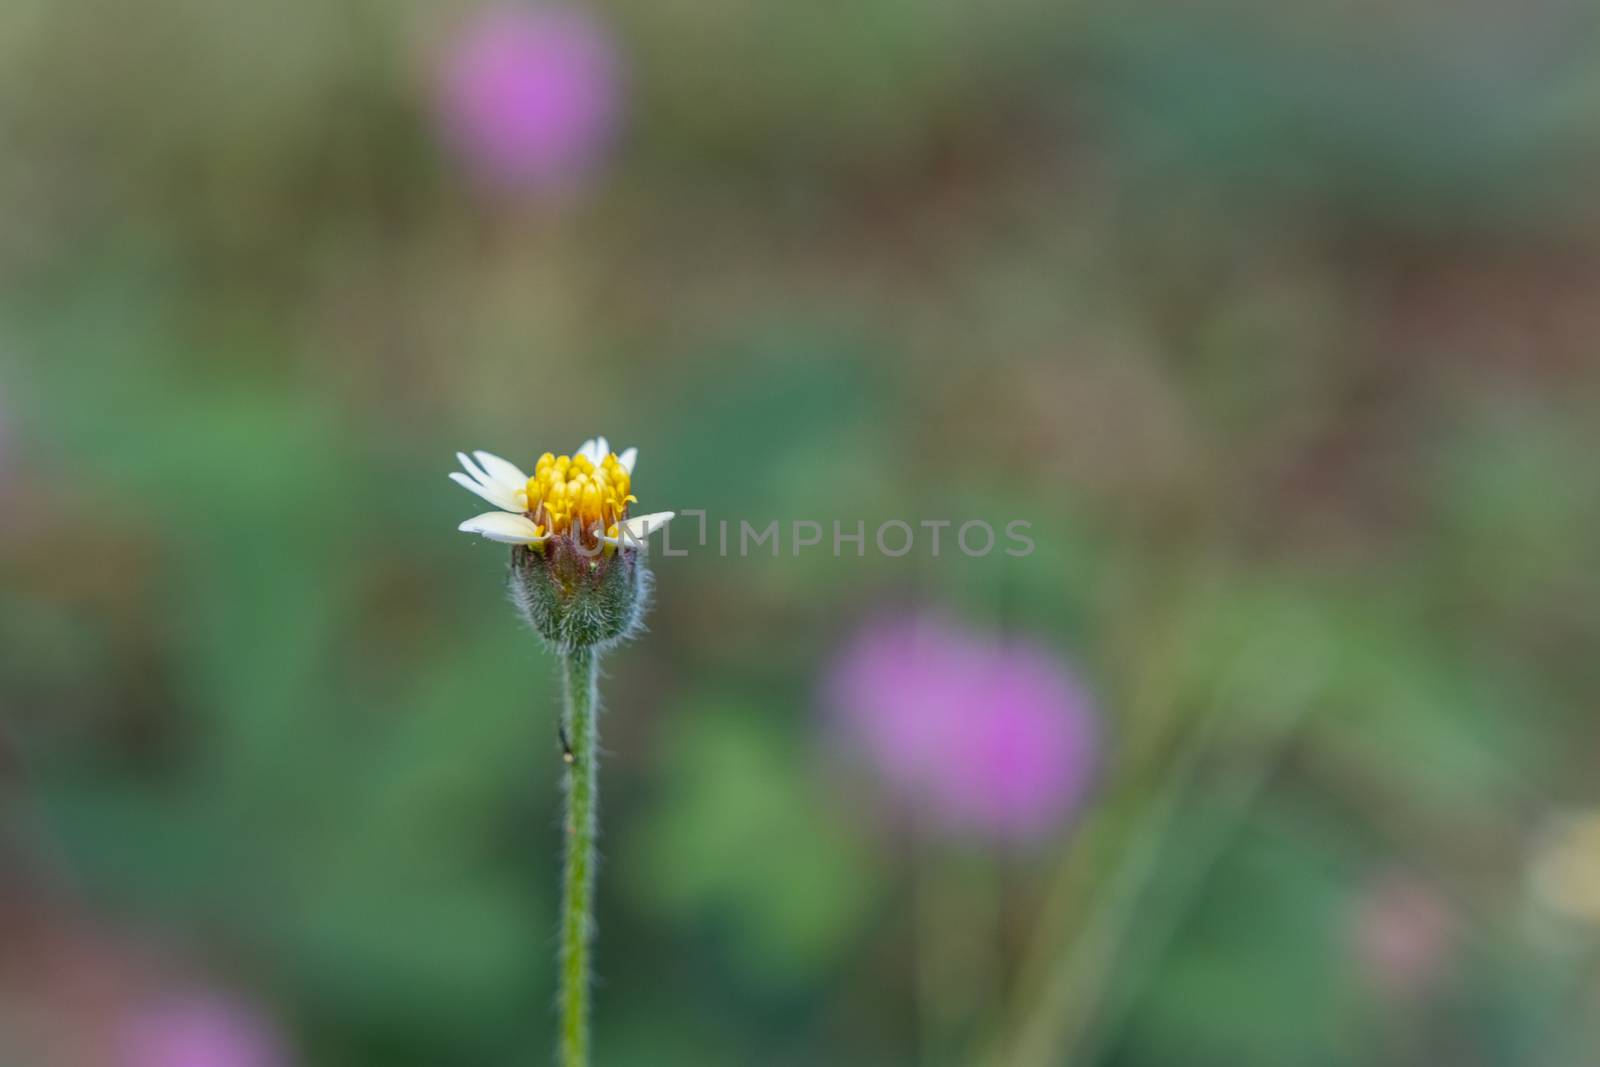 white wild daisy grass flowers under summer sunlight selective focus green grass field with blur authentic outdoor background by peerapixs